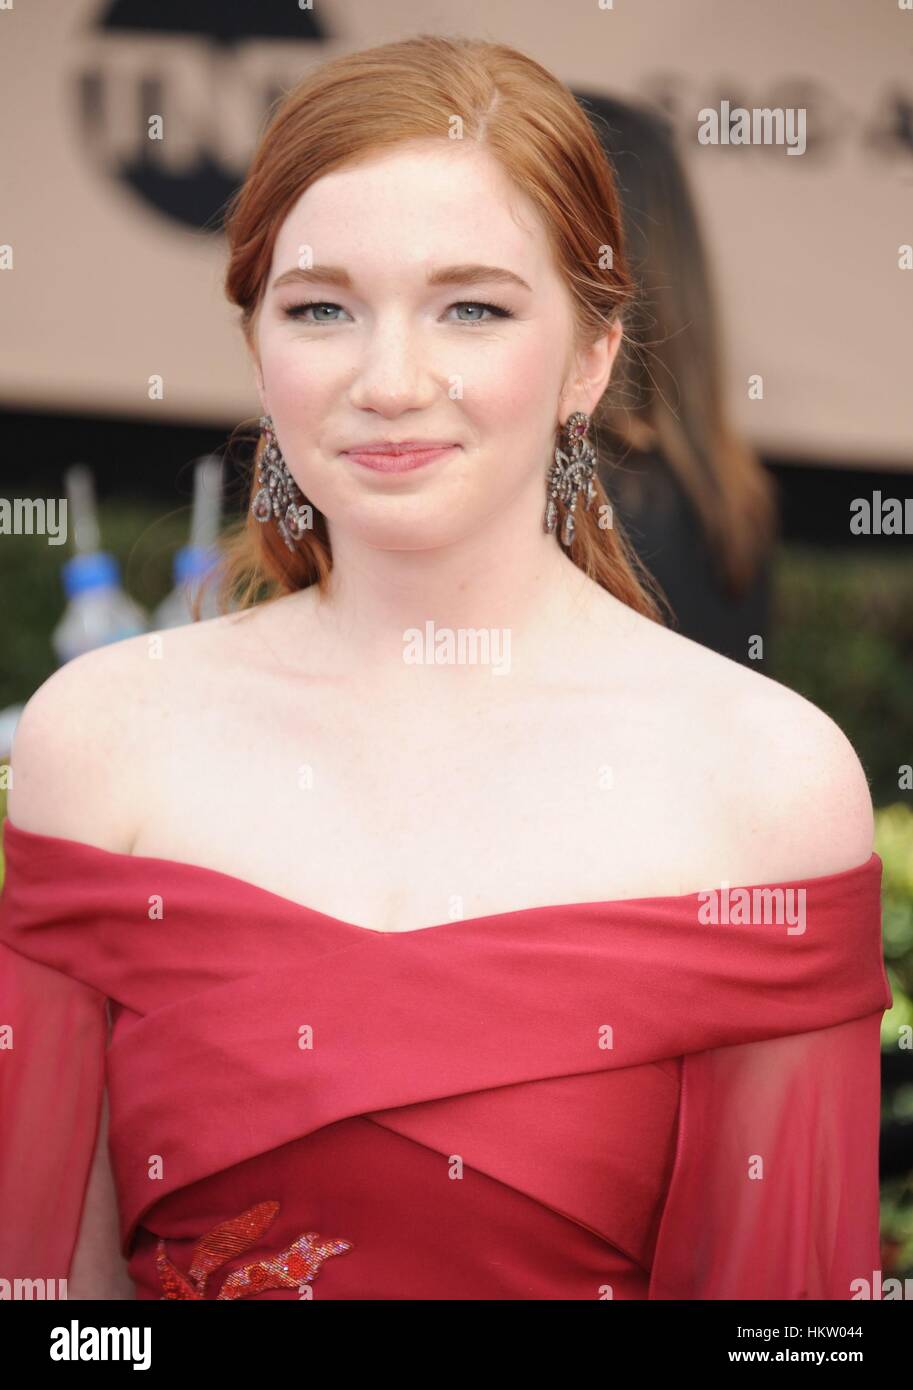 Los Angeles, CA, USA. 29th Jan, 2017. Annalise Basso at arrivals for 23rd Annual Screen Actors Guild Awards, Presented by SAG AFTRA - ARRIVALS 1, Shrine Exposition Center, Los Angeles, CA January 29, 2017. Credit: Dee Cercone/Everett Collection/Alamy Live News Stock Photo